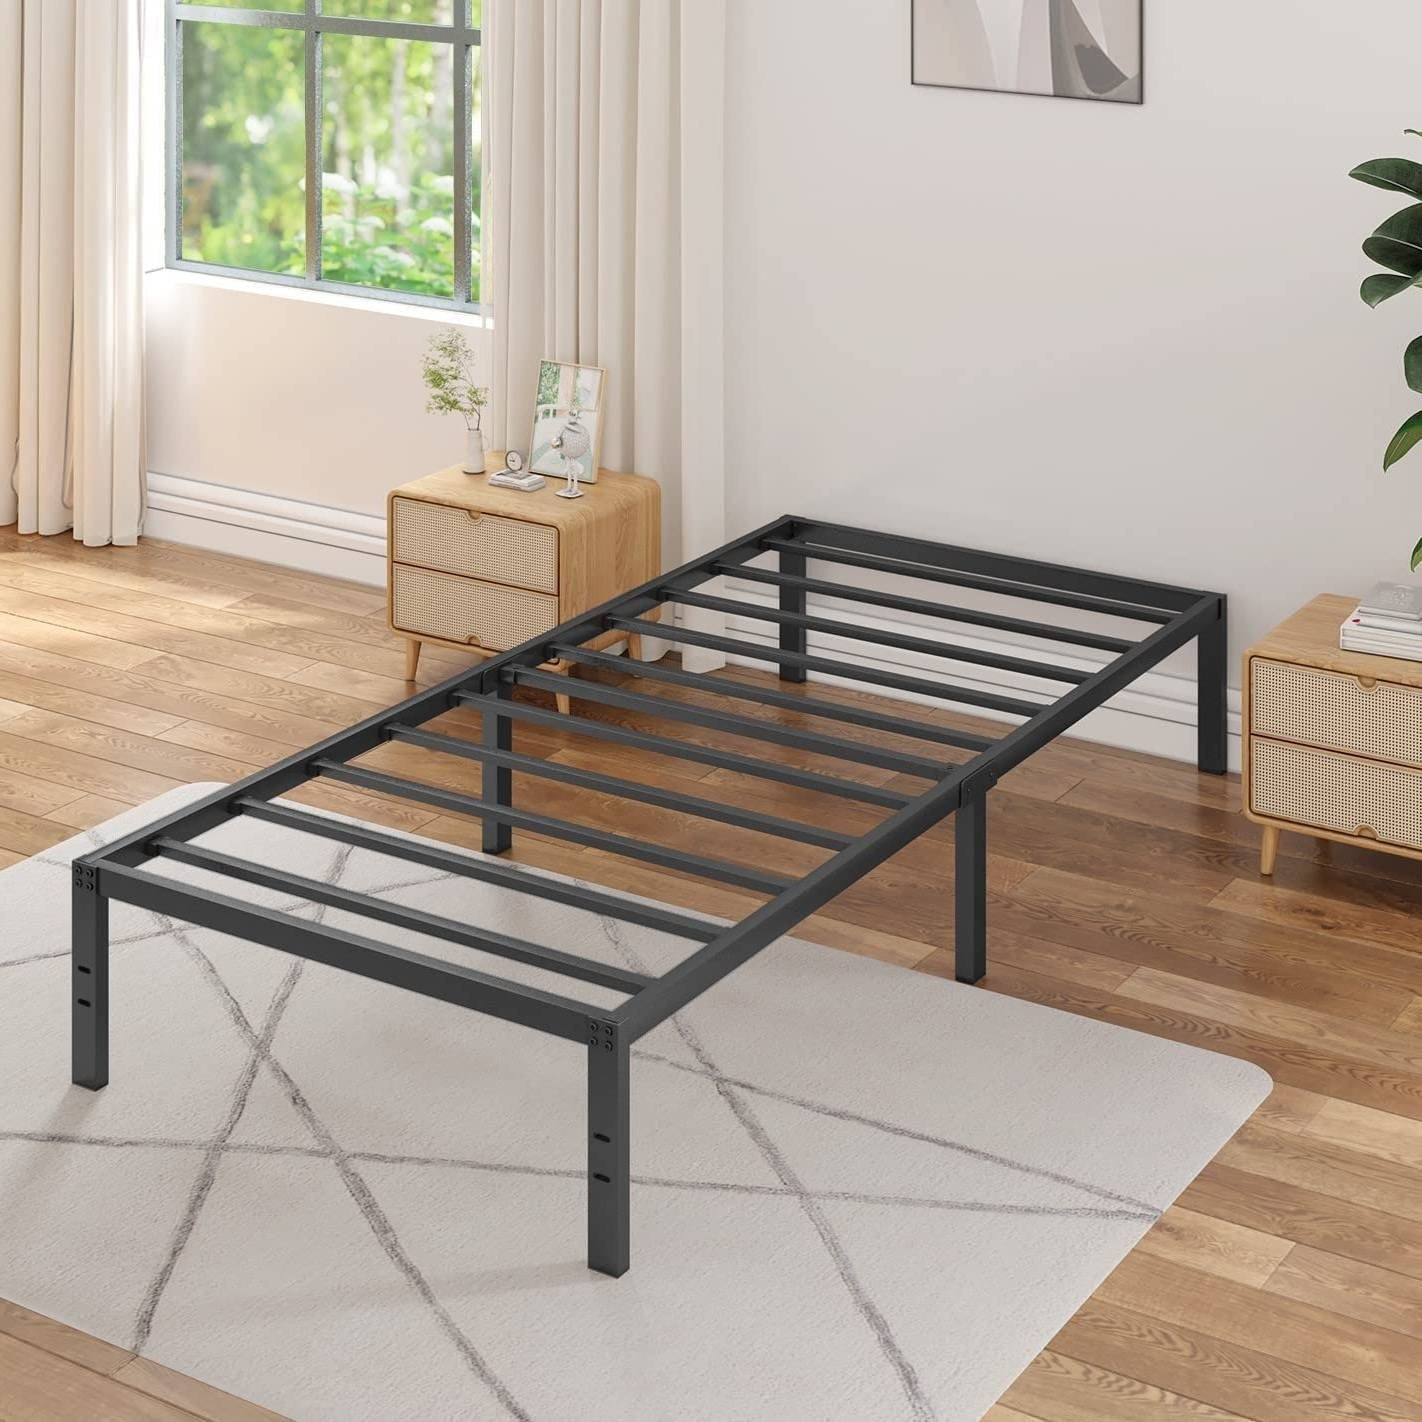 Bedroom > Bed Frames > Platform Beds - Twin XL 16-inch Heavy Duty Metal Bed Frame With 3,000 Lbs Weight Capacity